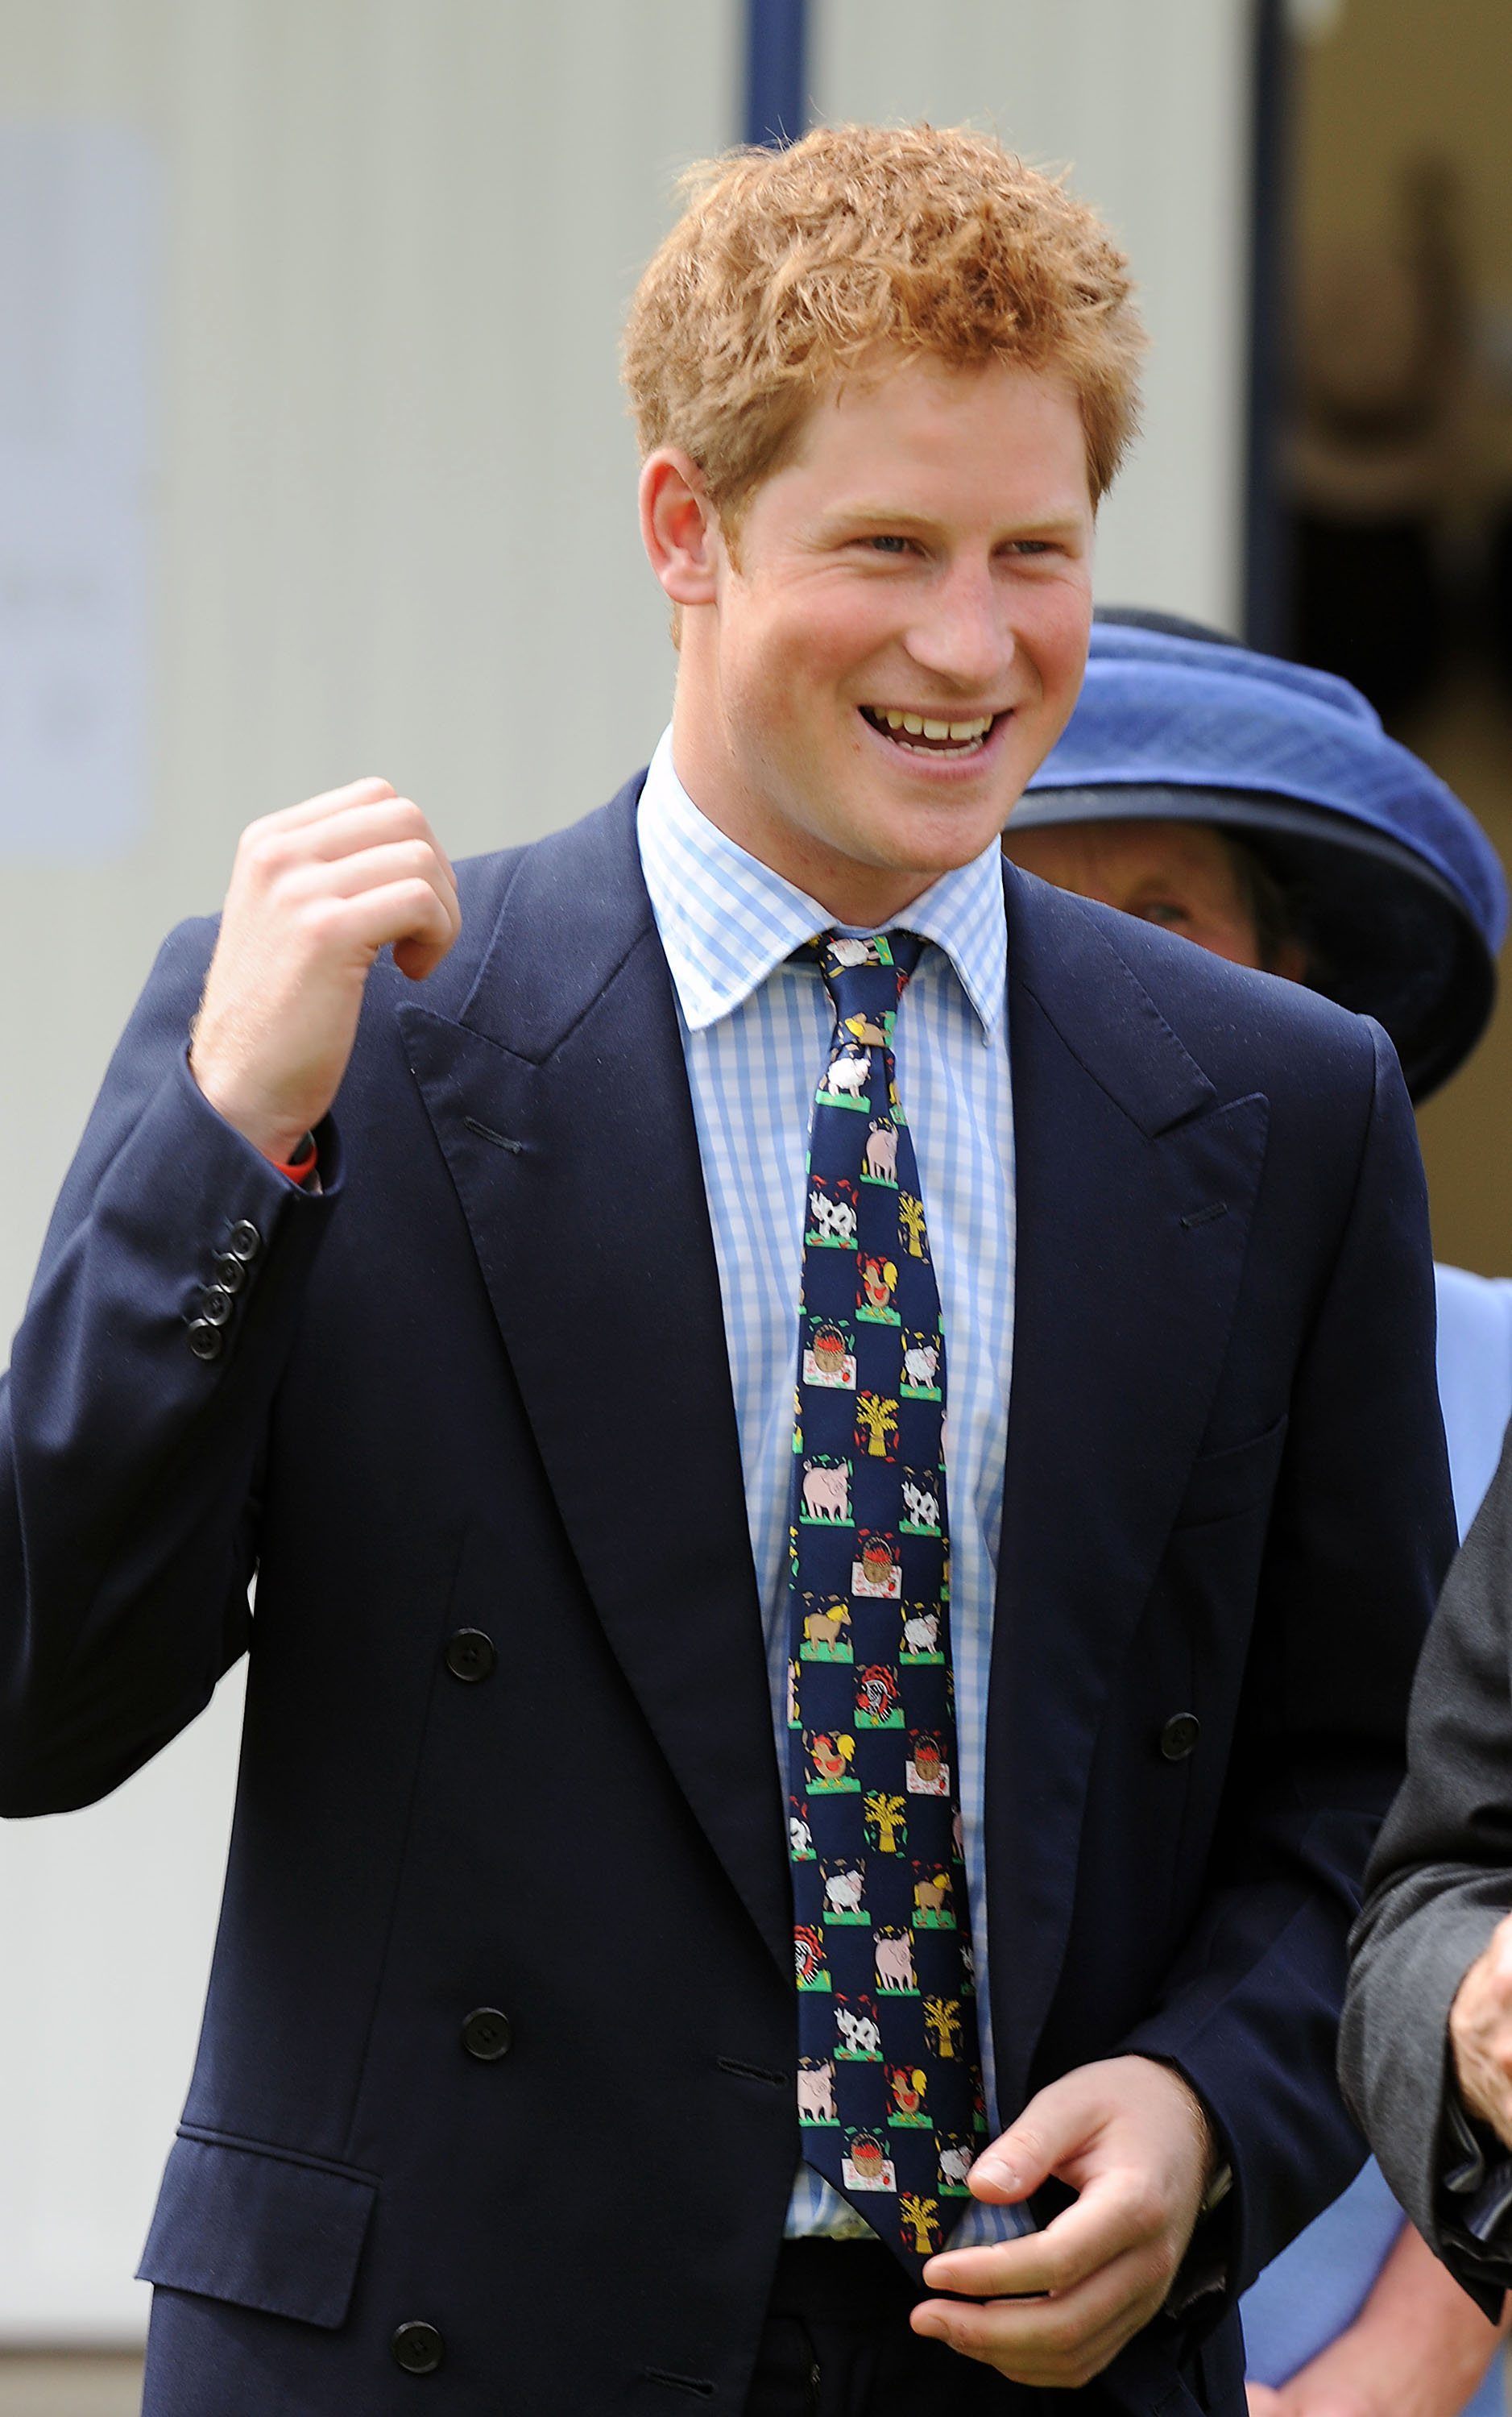 Prince Harry of Wales photo 52 of 450 pics, wallpaper - photo #547278 - ThePlace21877 x 3000